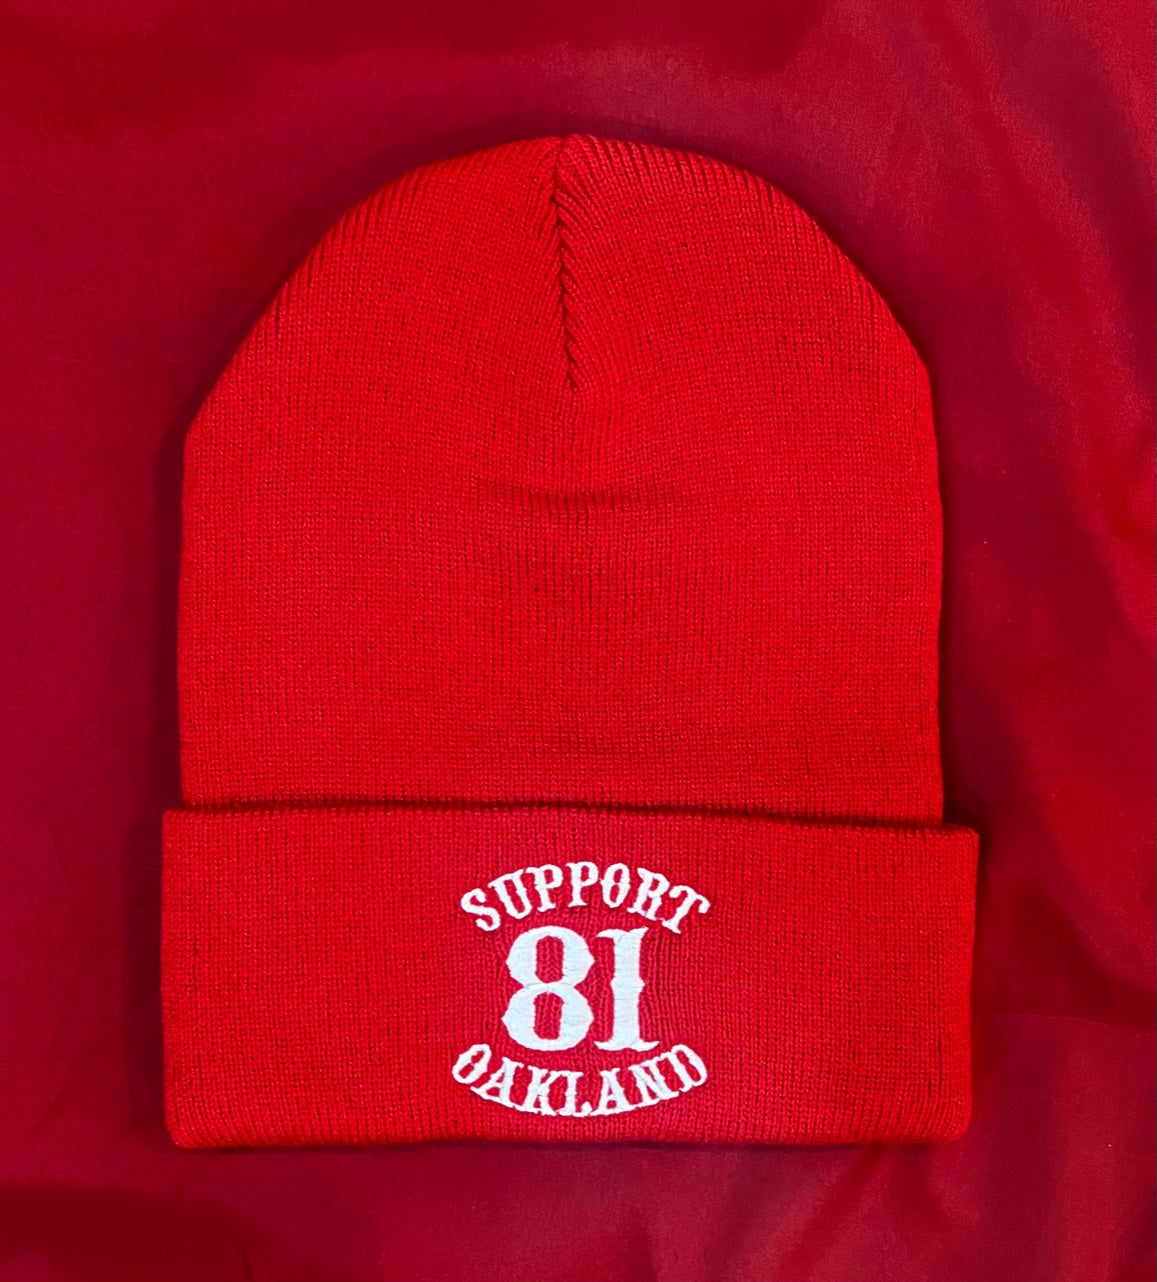 2 COLORS AVAILABLE - OAKLAND SUPPORT 81 BEANIE